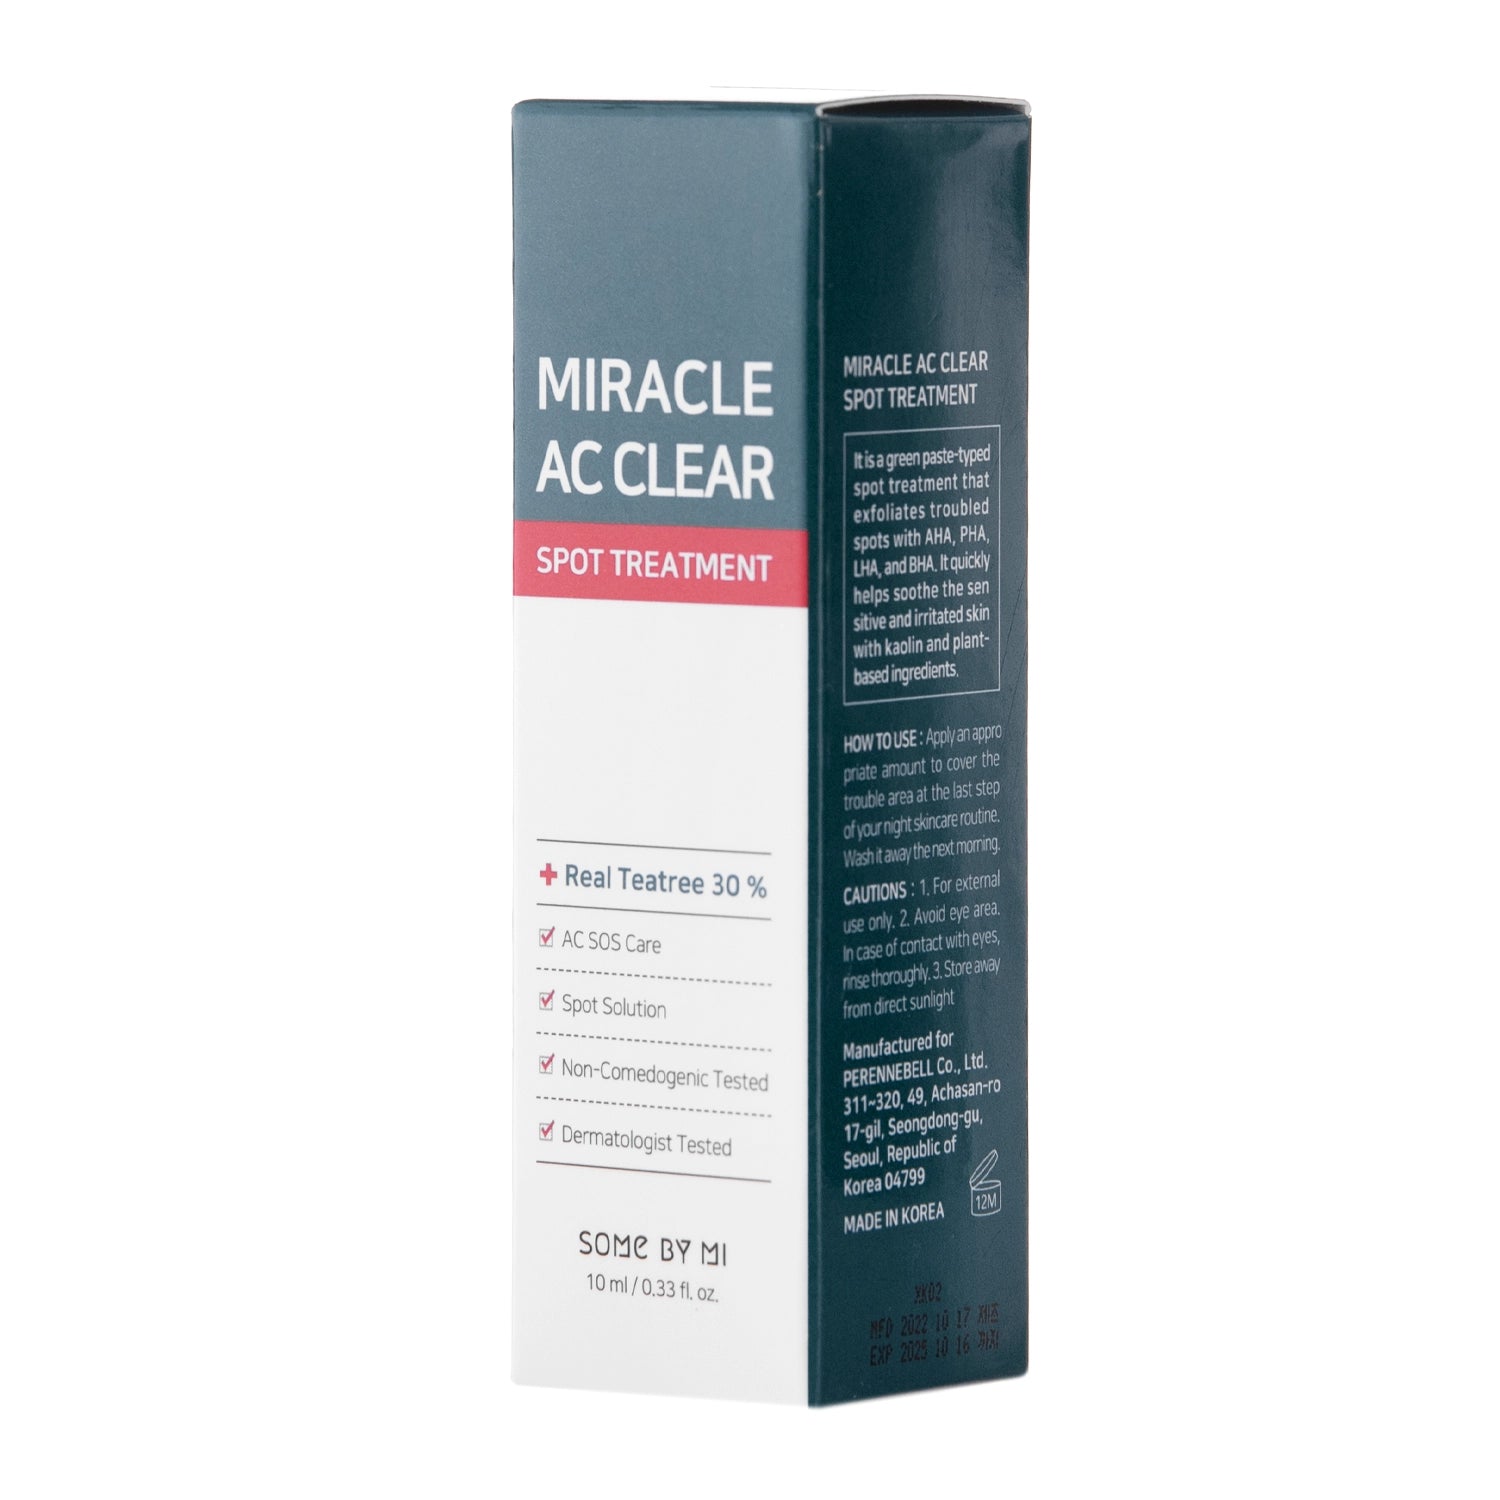 SOME BY MI Miracle AC Clear Spot Treatment 10g